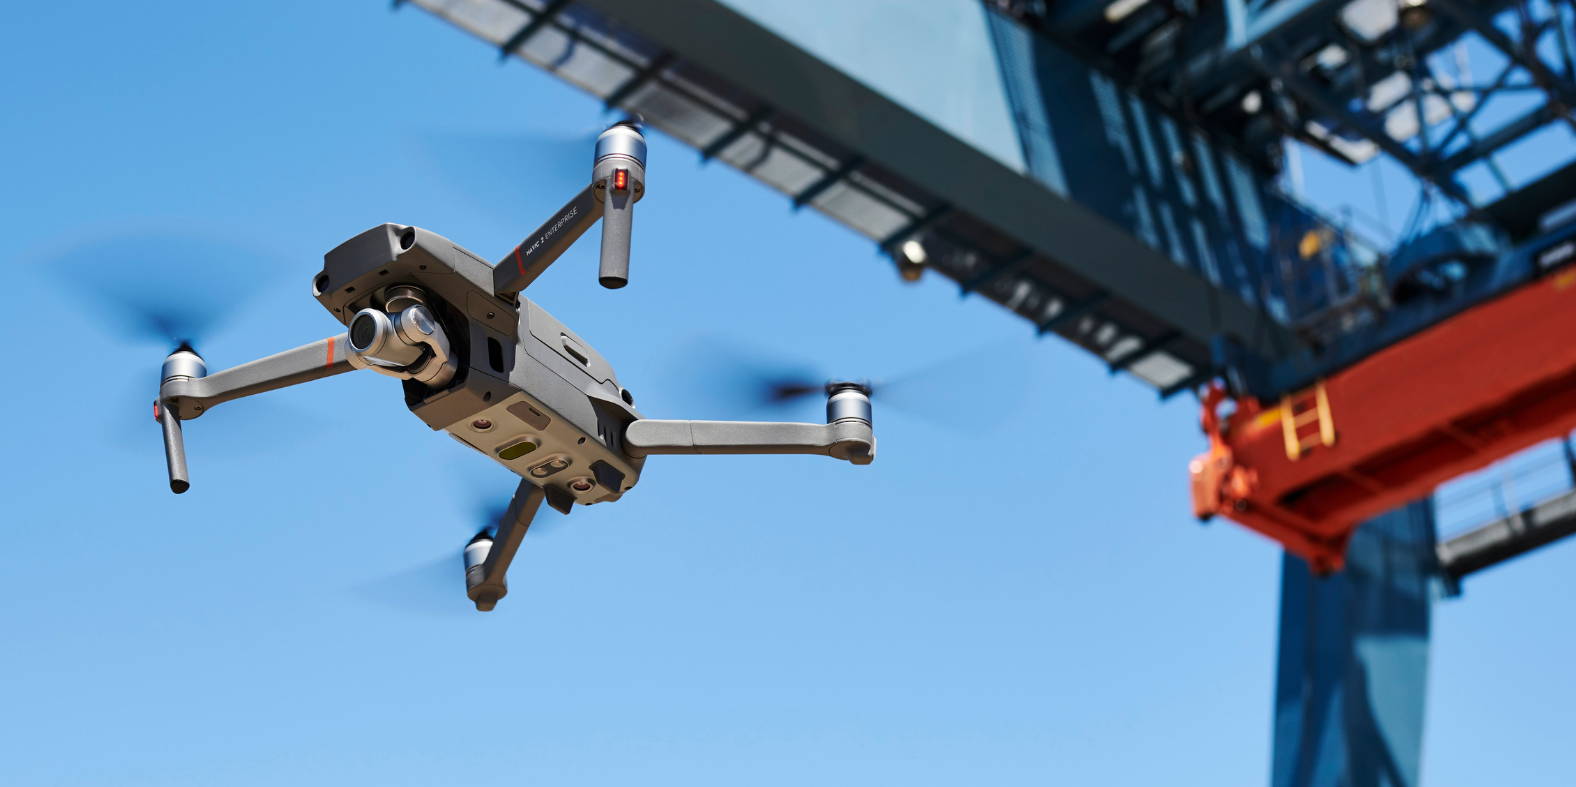 What You Need to Know About Canada’s Drone Laws in June 2019